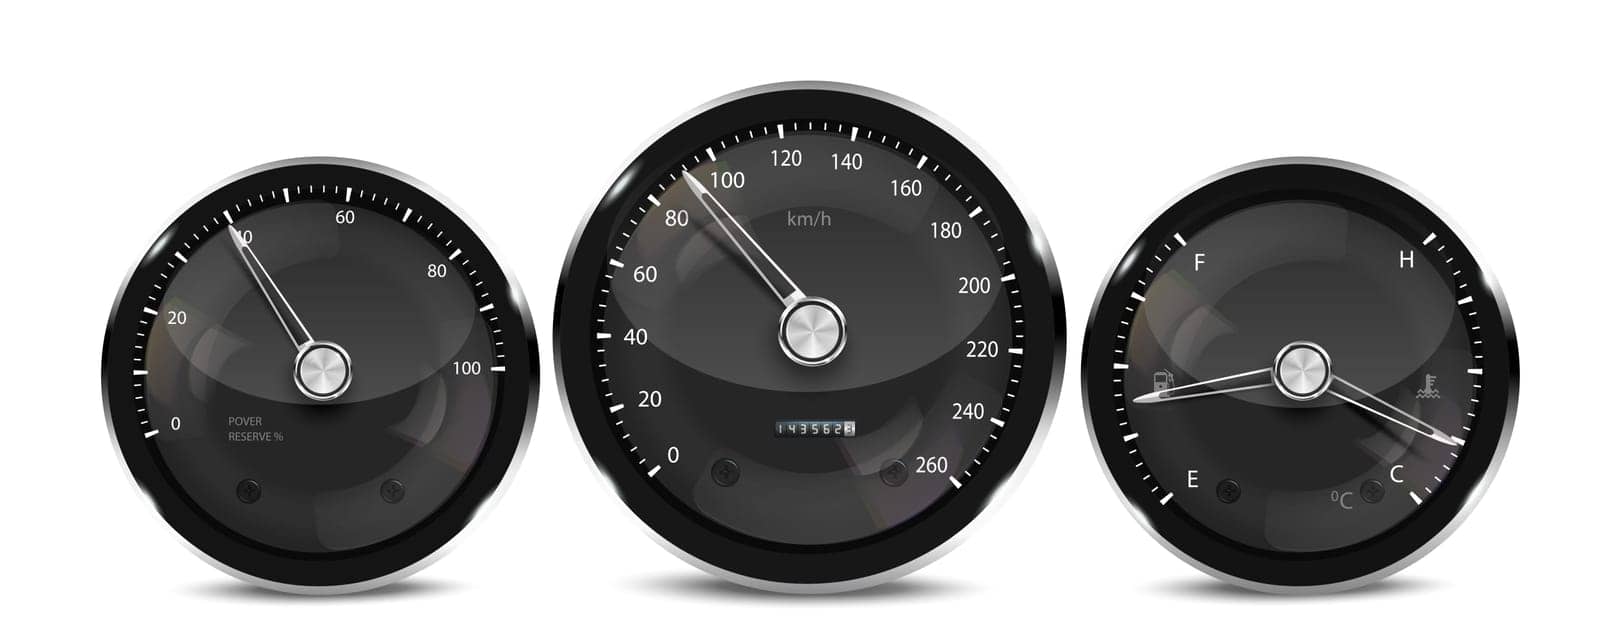 Car dashboard speedometer, tachometer, digital LED indicators for fuel and engine temperature. Vector realistic elements of car dashboard instrument cluster. by Samodelkin20